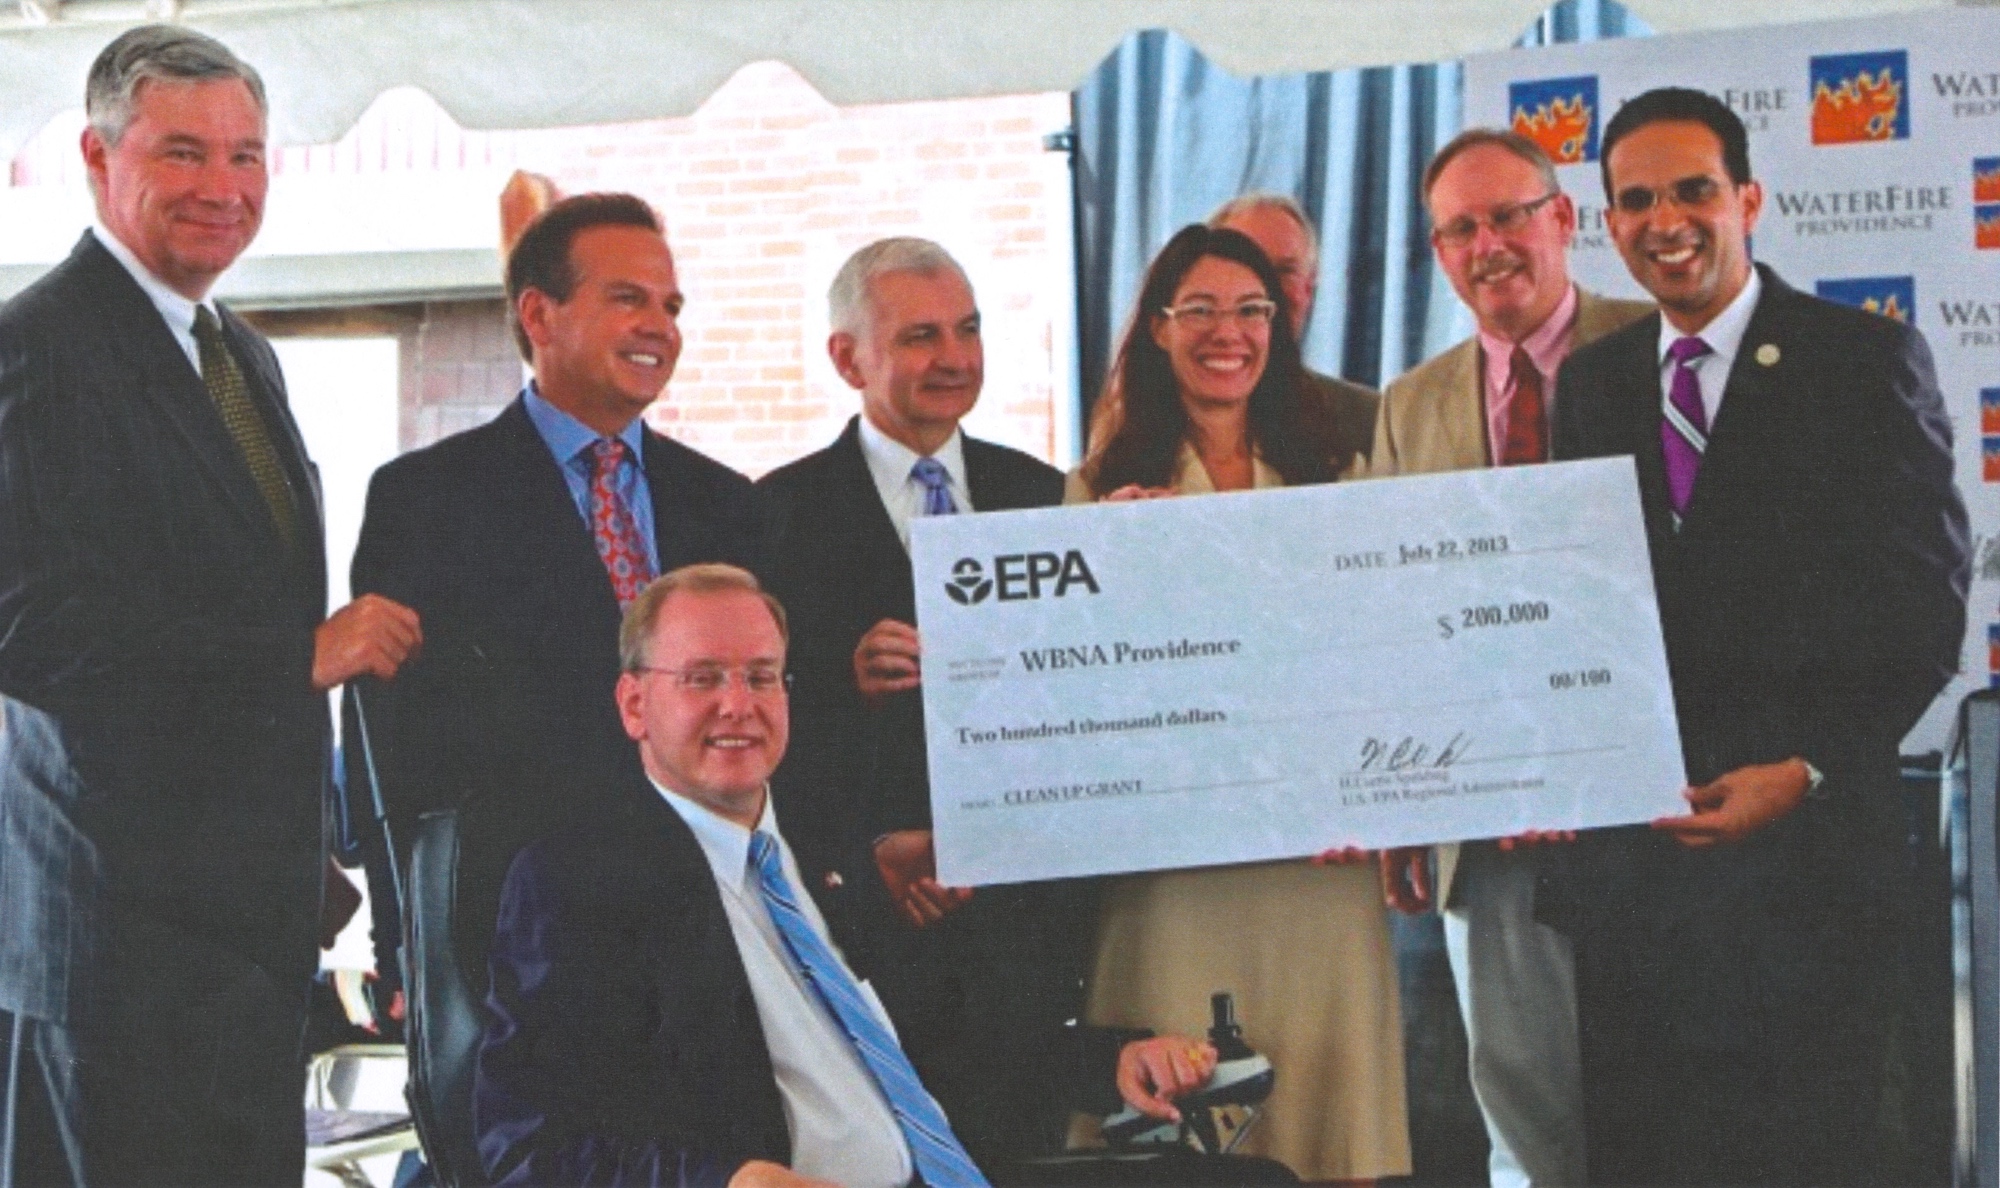  WBNA was awarded a $200,000 EPA Brownfields Cleanup Grant in 2013 